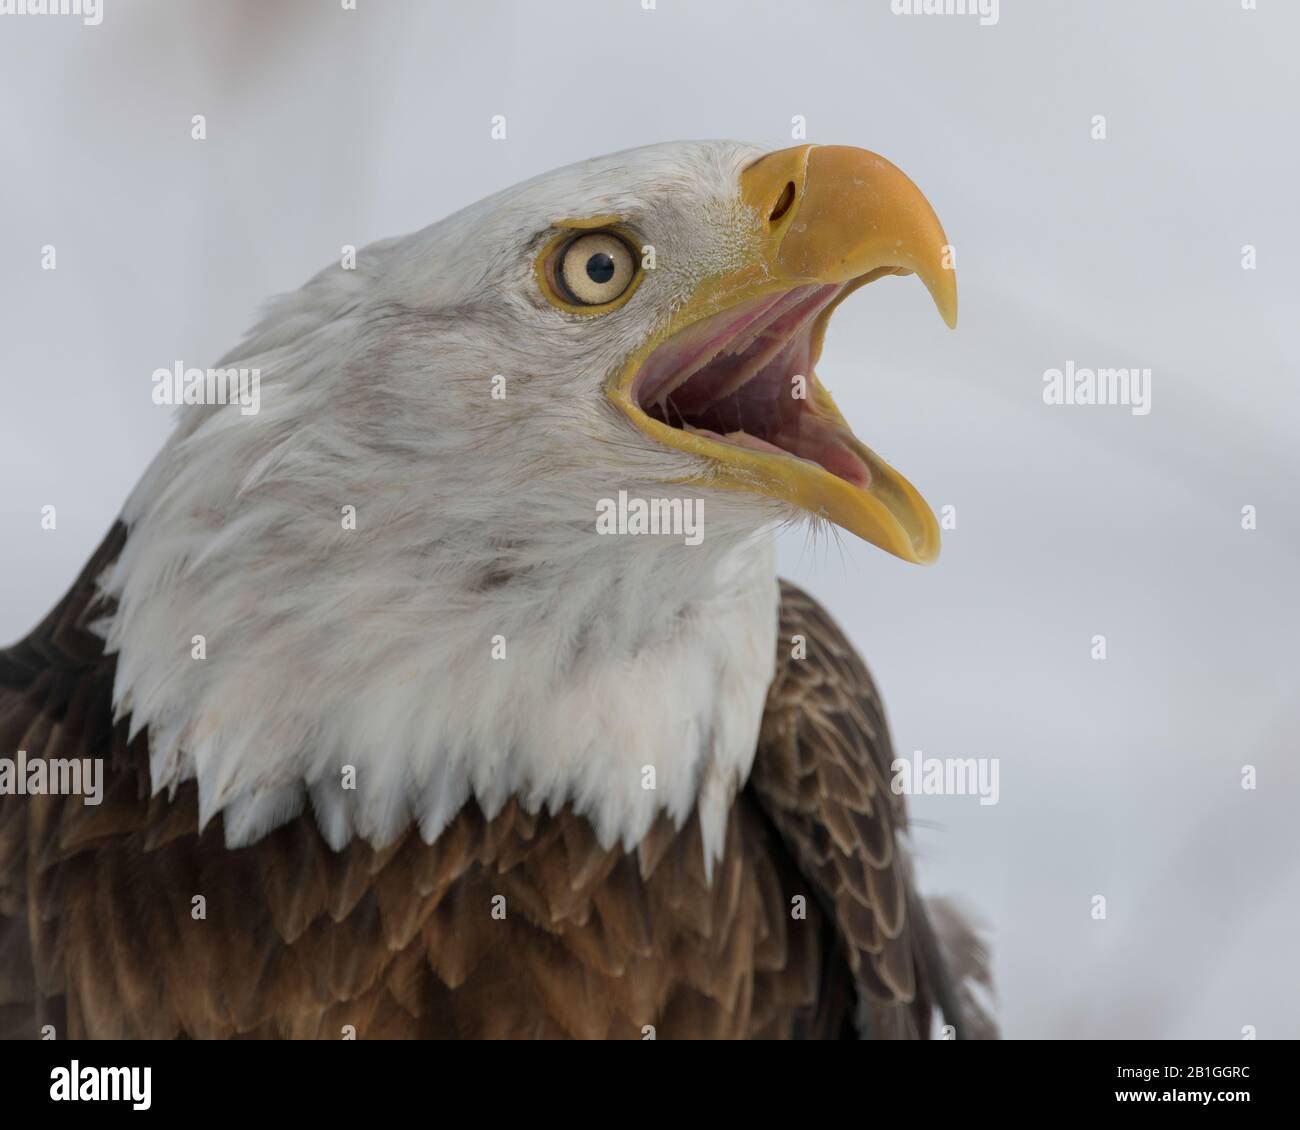 American bald eagle closeup portrait with open mouth Stock Photo